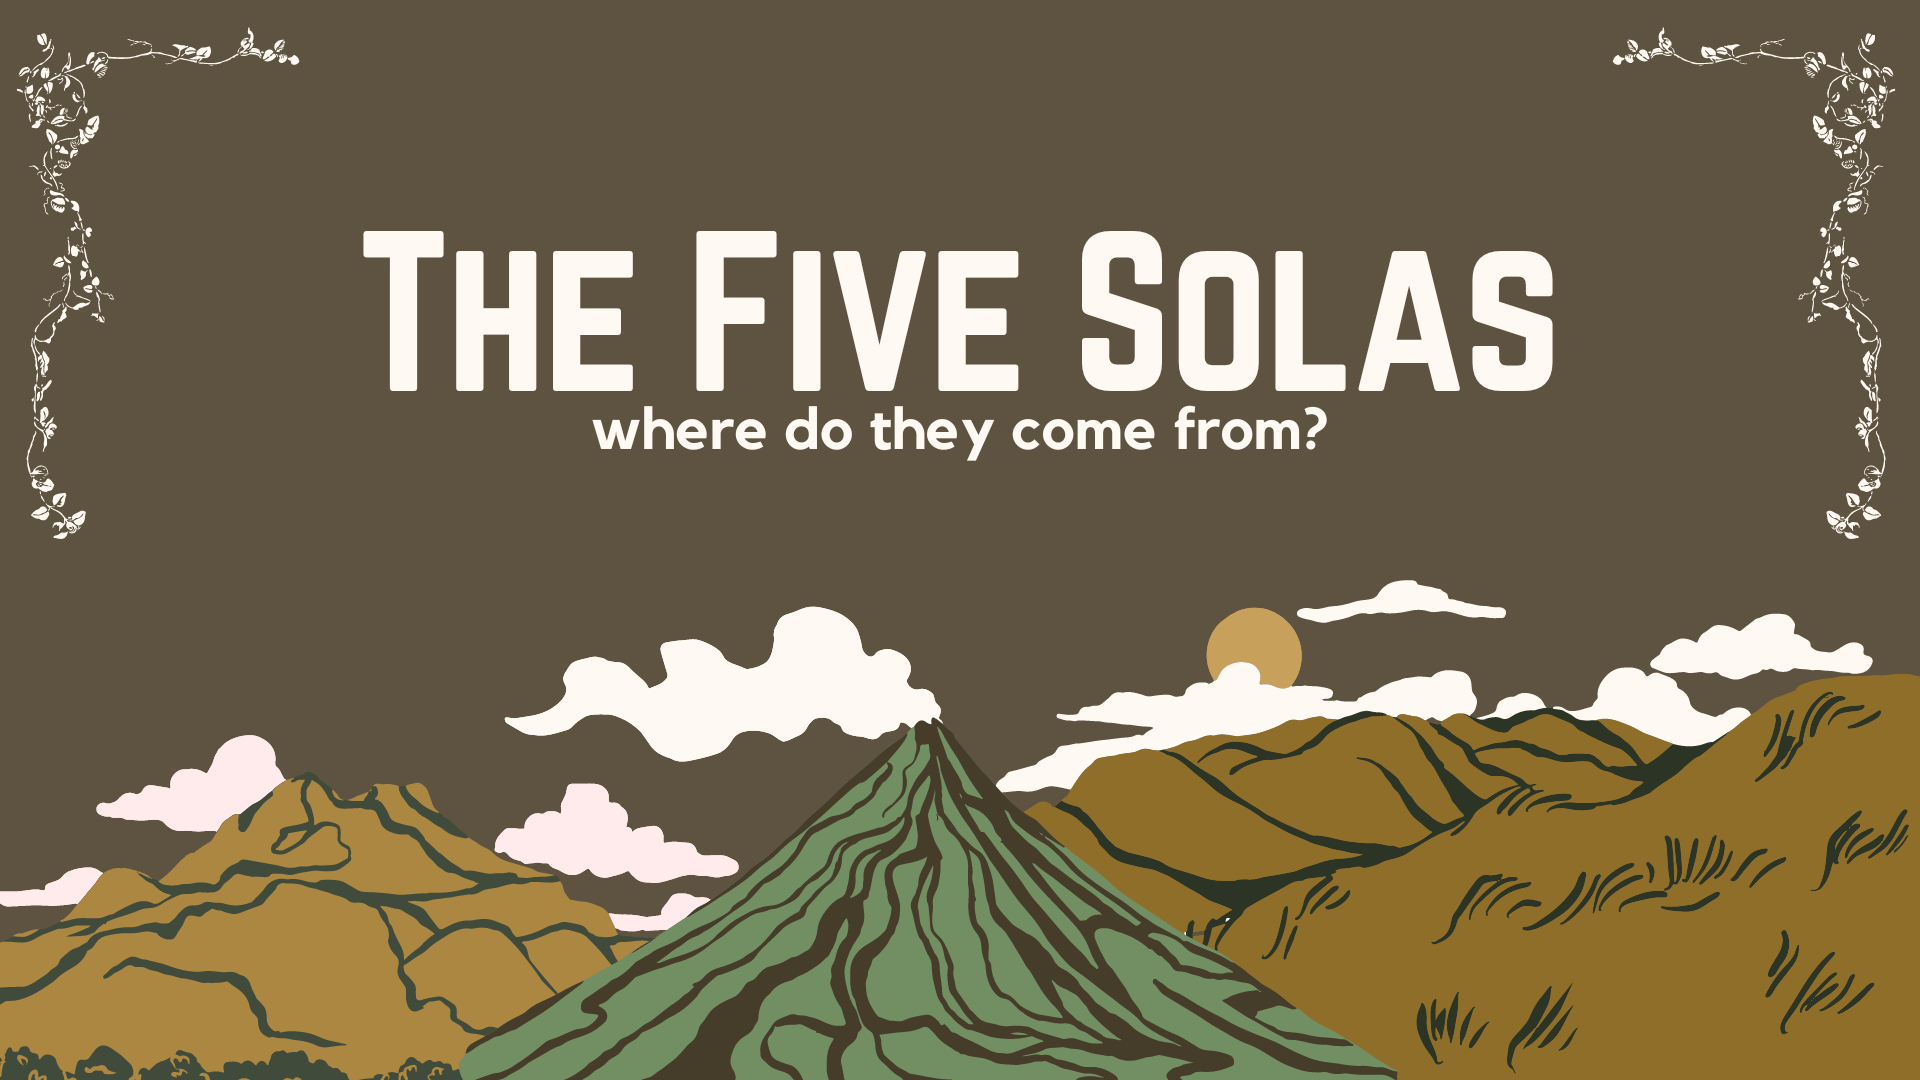 The Five Solas: Introduction